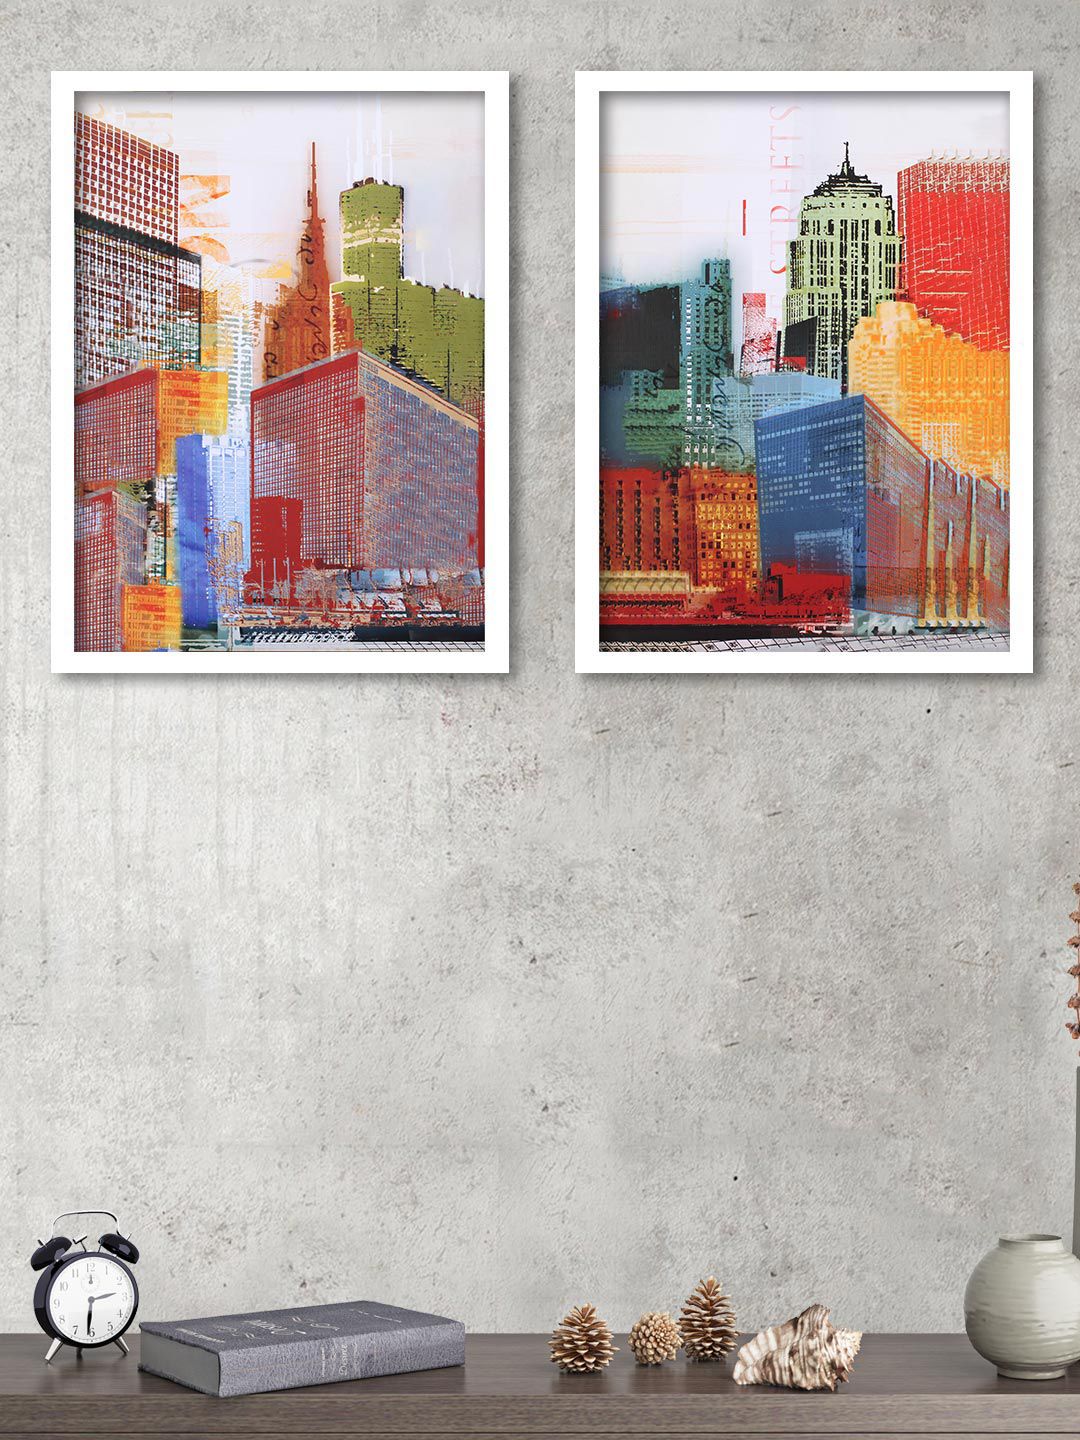 Art Street Set Of 2 City Theme Framed Wall Art Price in India